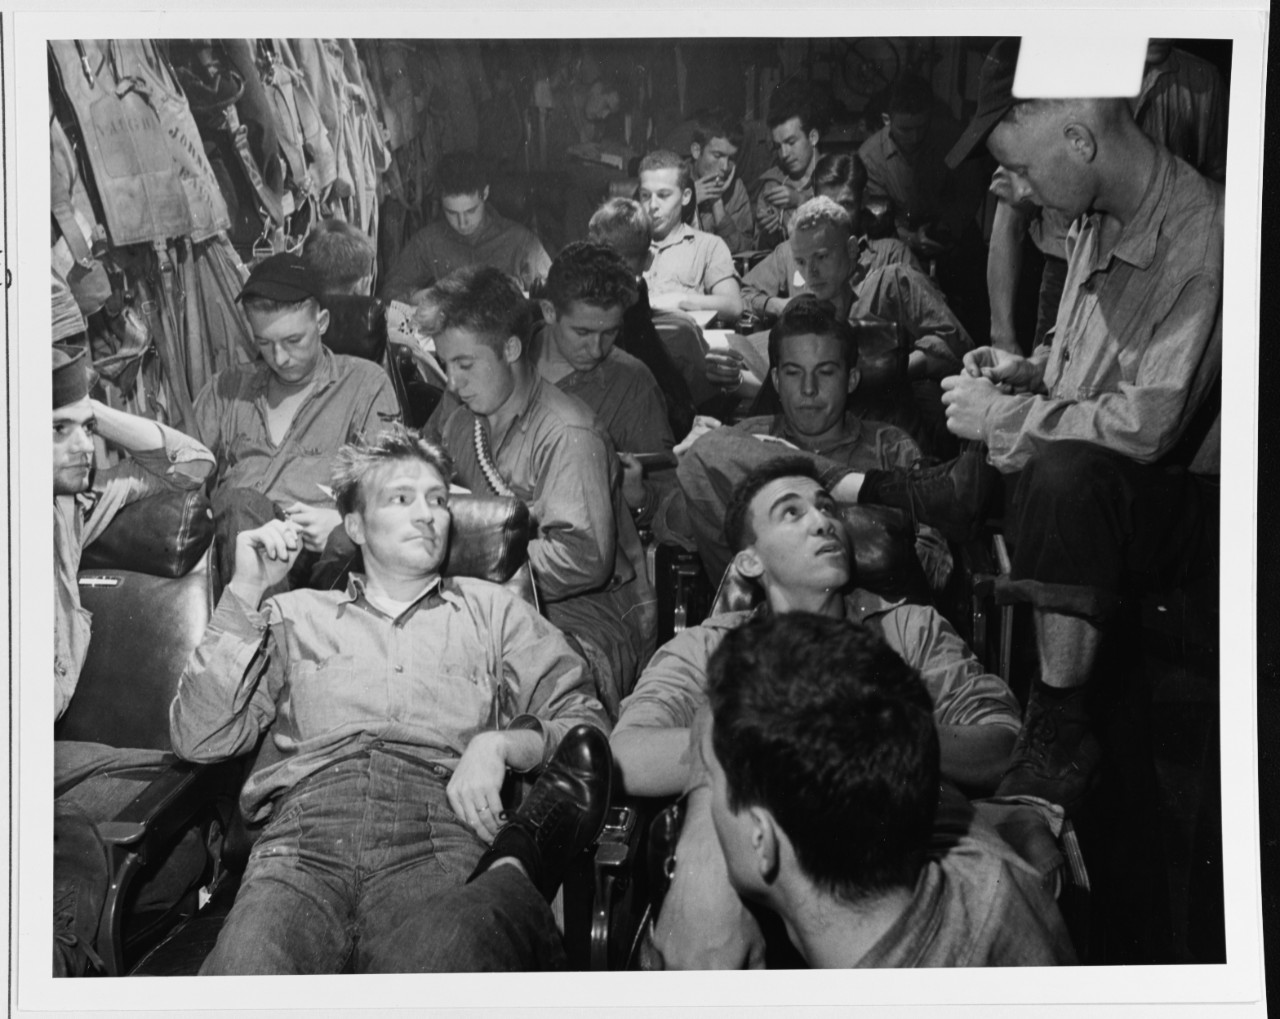 Aircrewmen relaxing in the ready room of USS TICONDEROGA (CV-14)